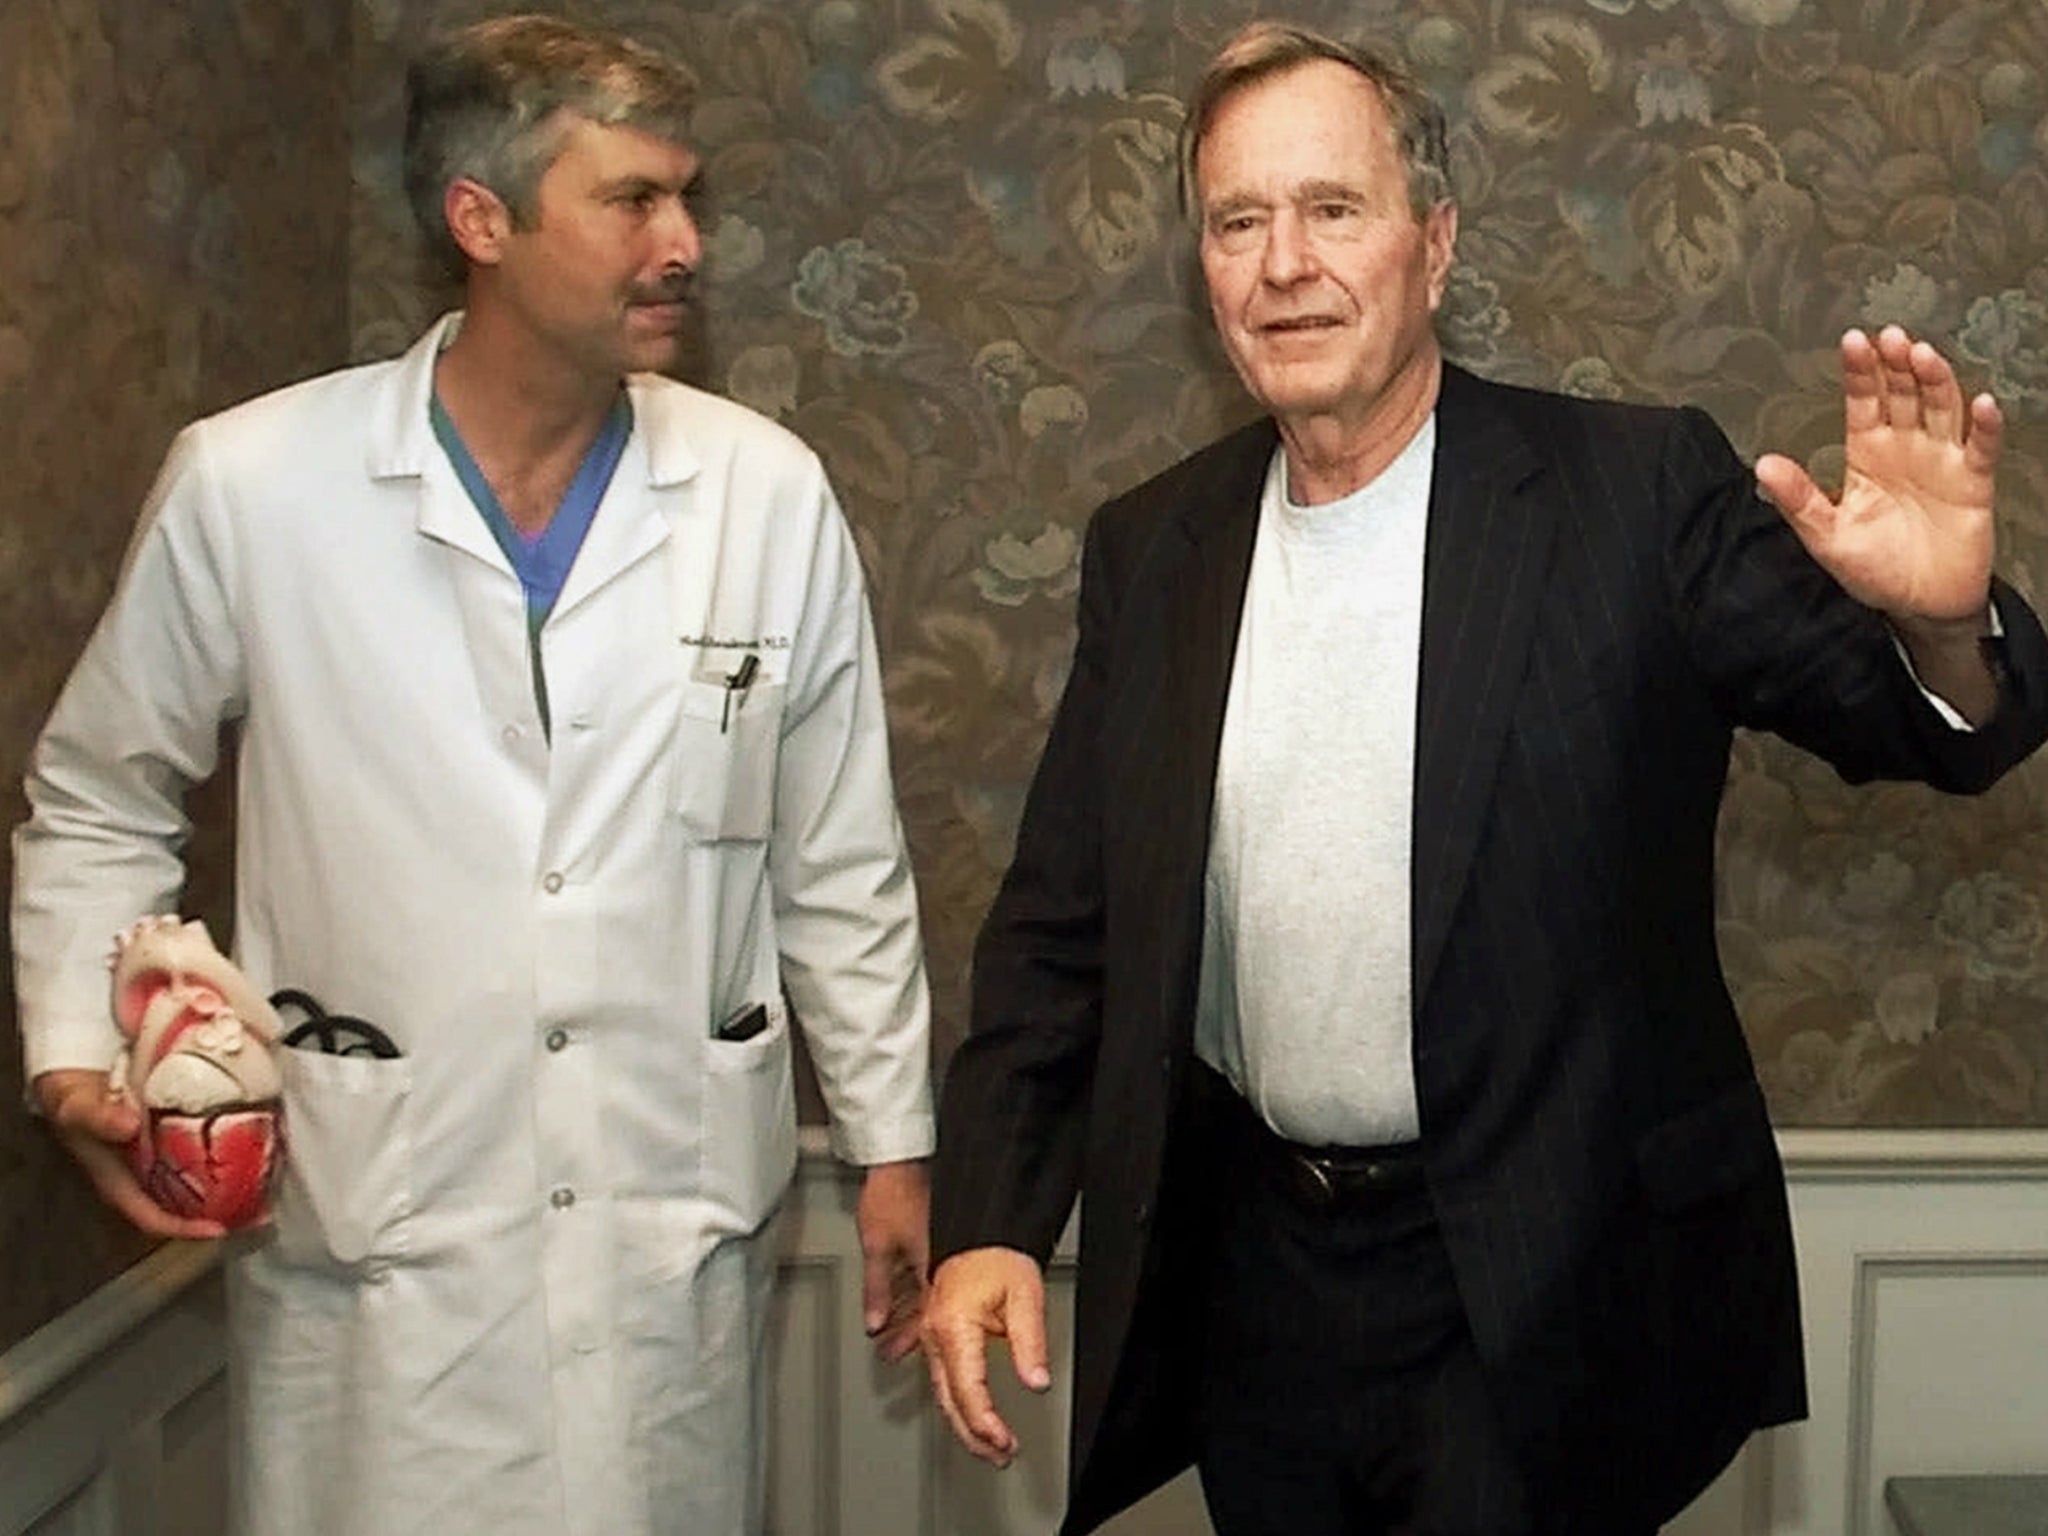 In this 25 February 2000 file photo, former President George HW Bush waves as he leaves Methodist Hospital with his cardiologist, Mark Hausknecht, who was killed in a bicycle drive-by shooting on 20 July 2018.